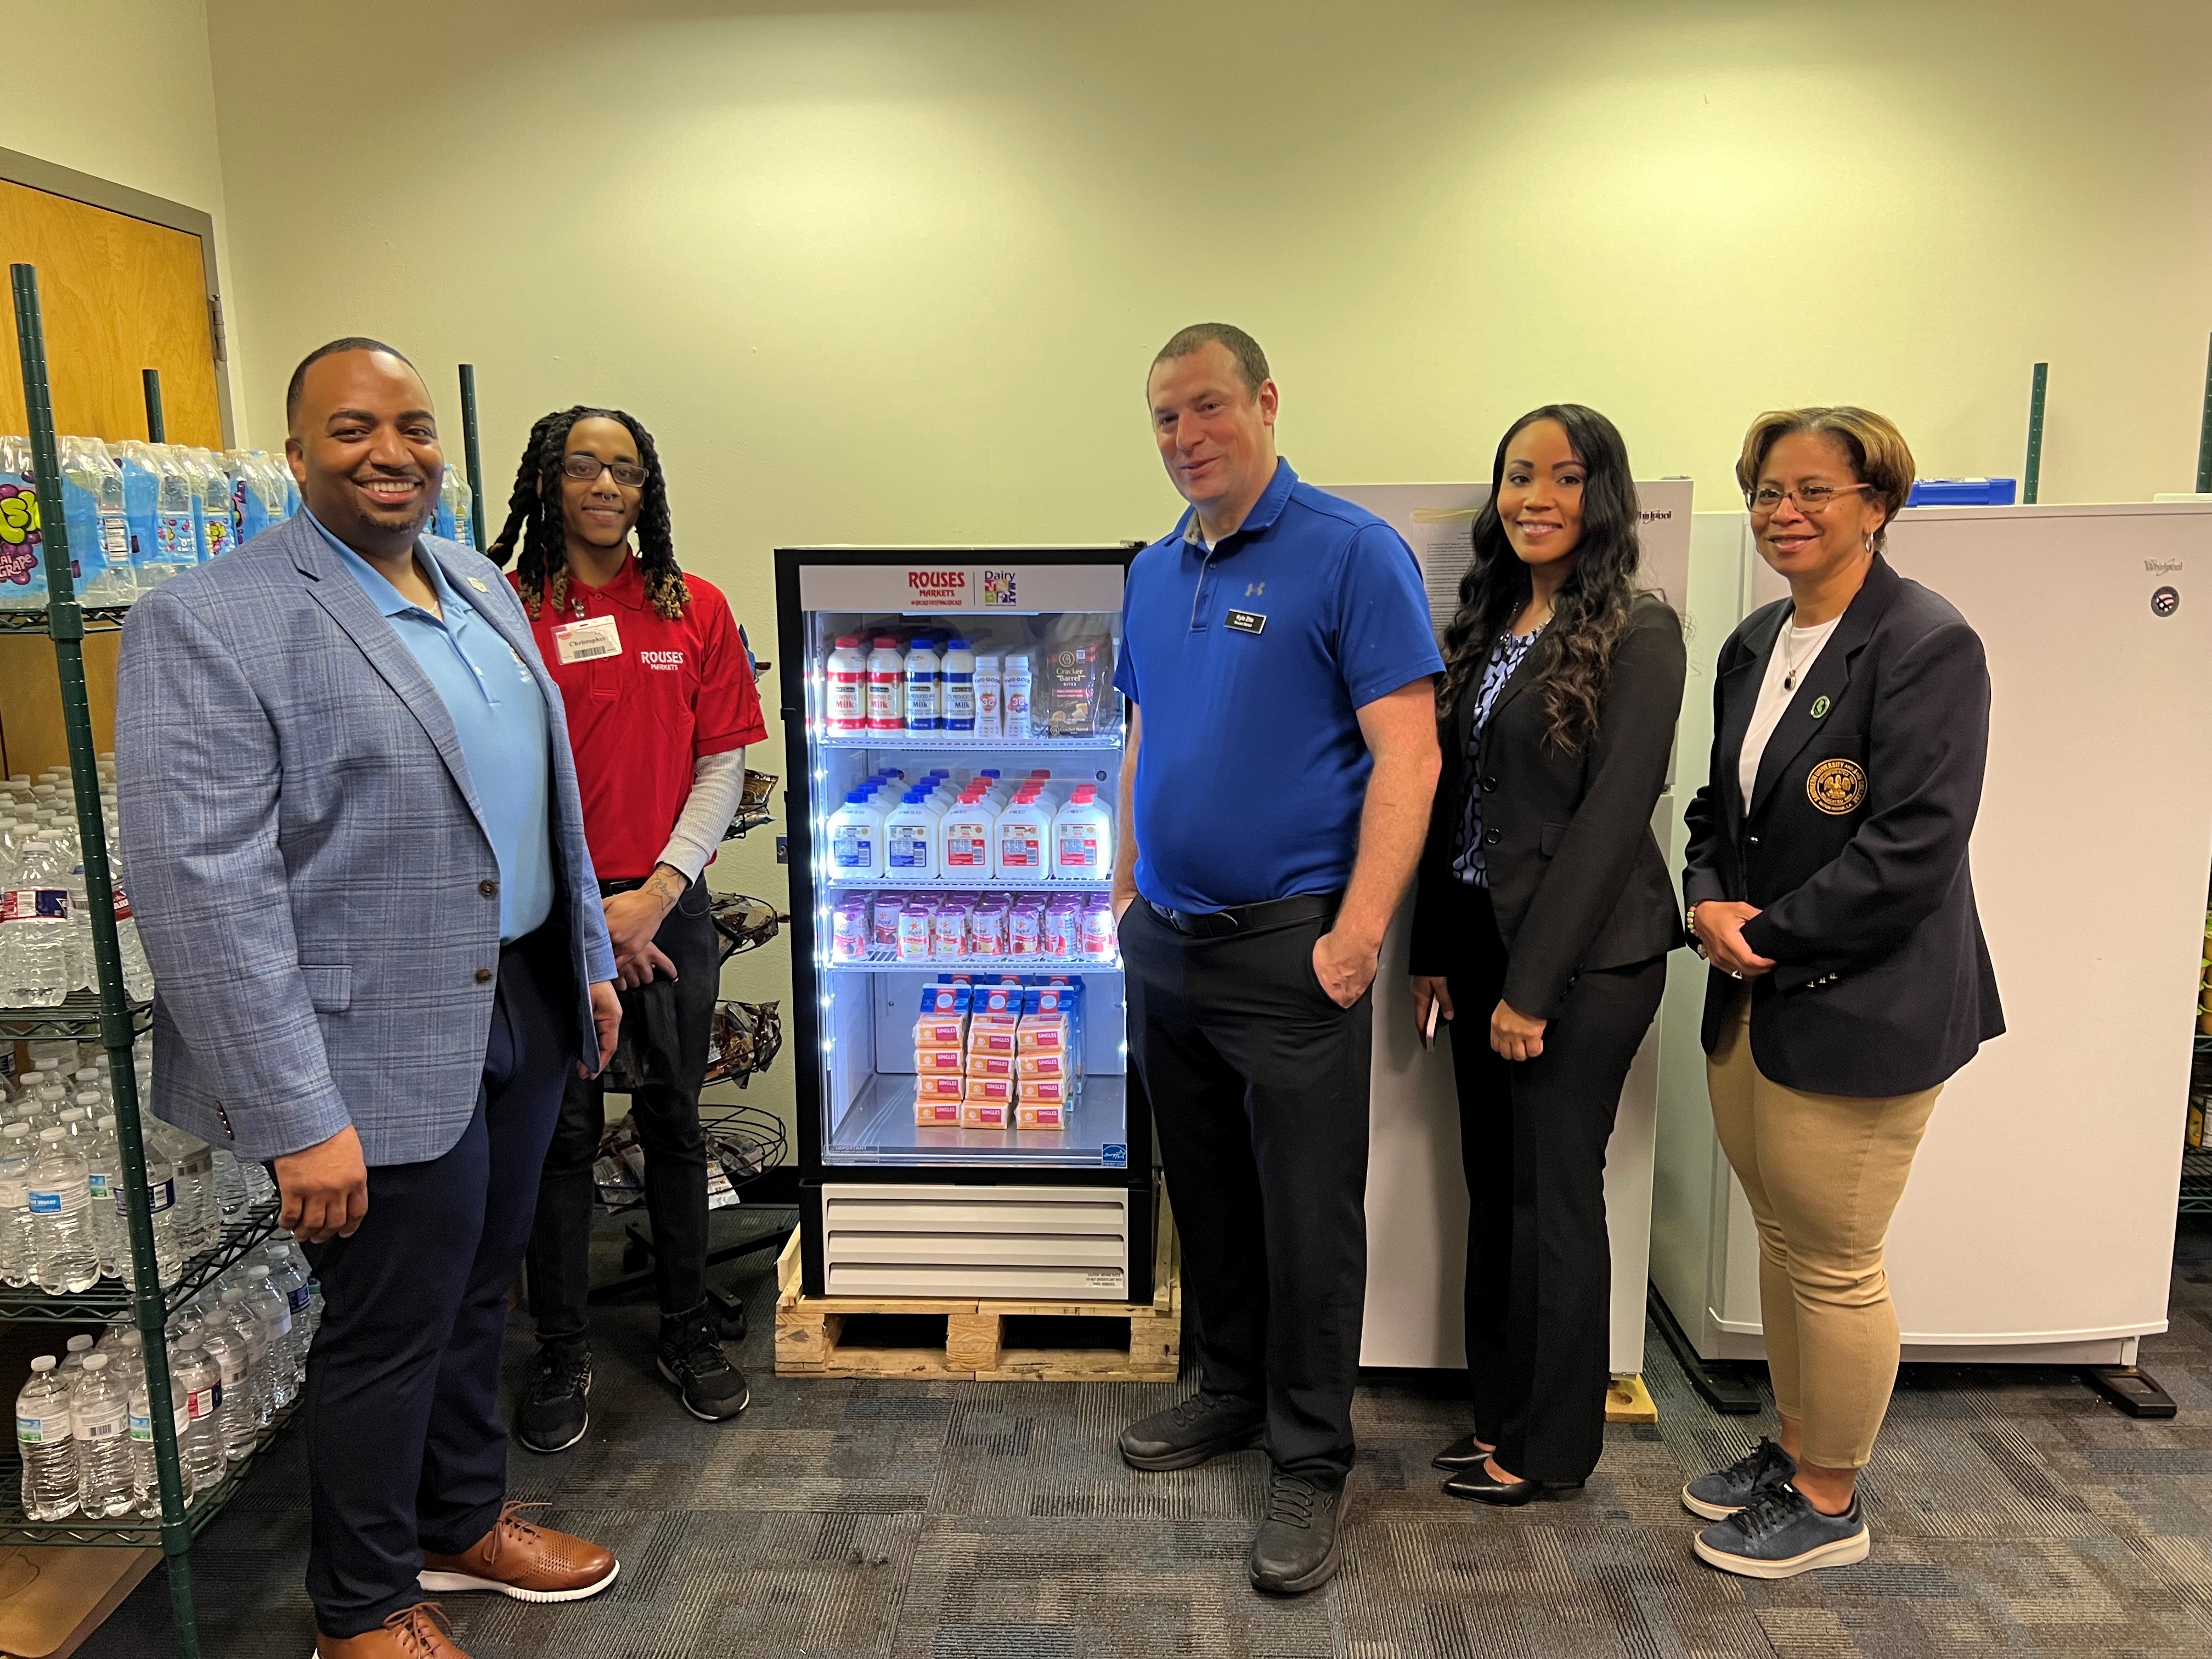 Dairy MAX Rouses Partnership